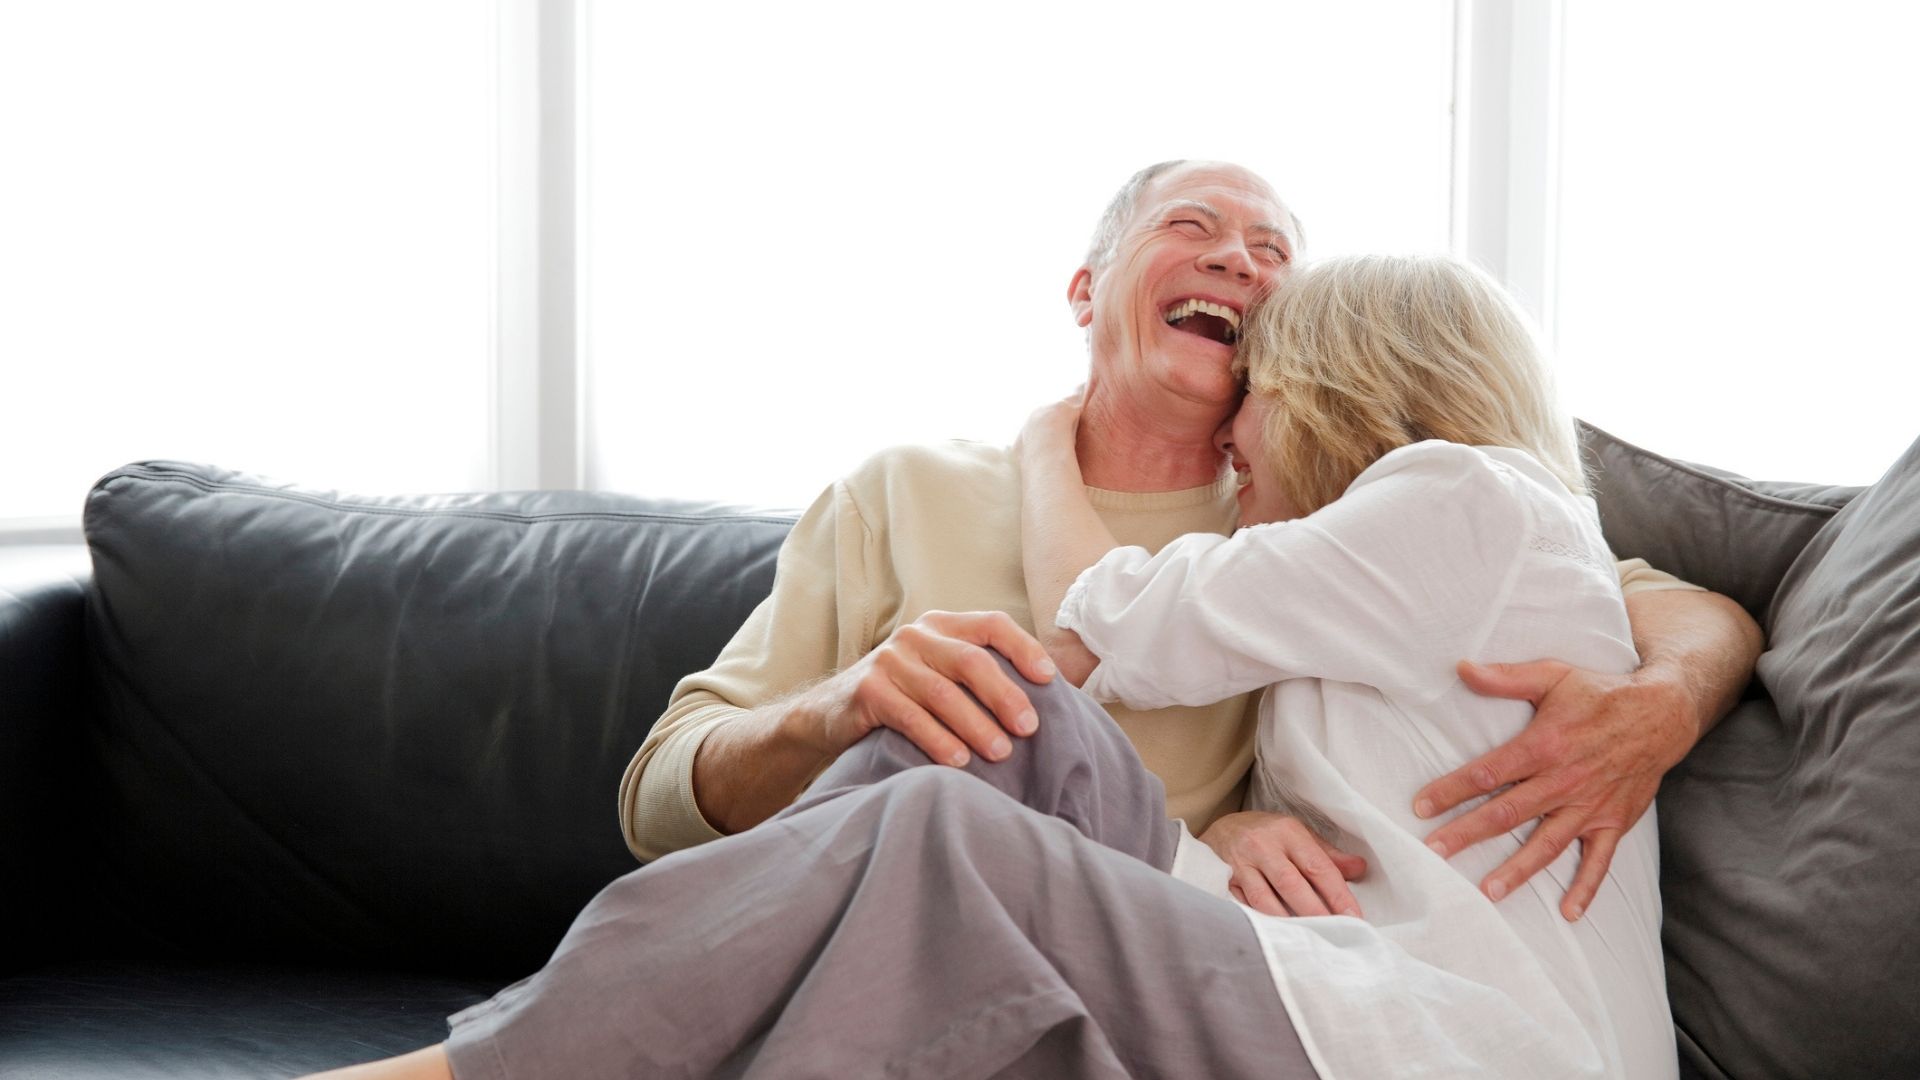 15 Best Dating Sites for Seniors in 2022 - Woman's World